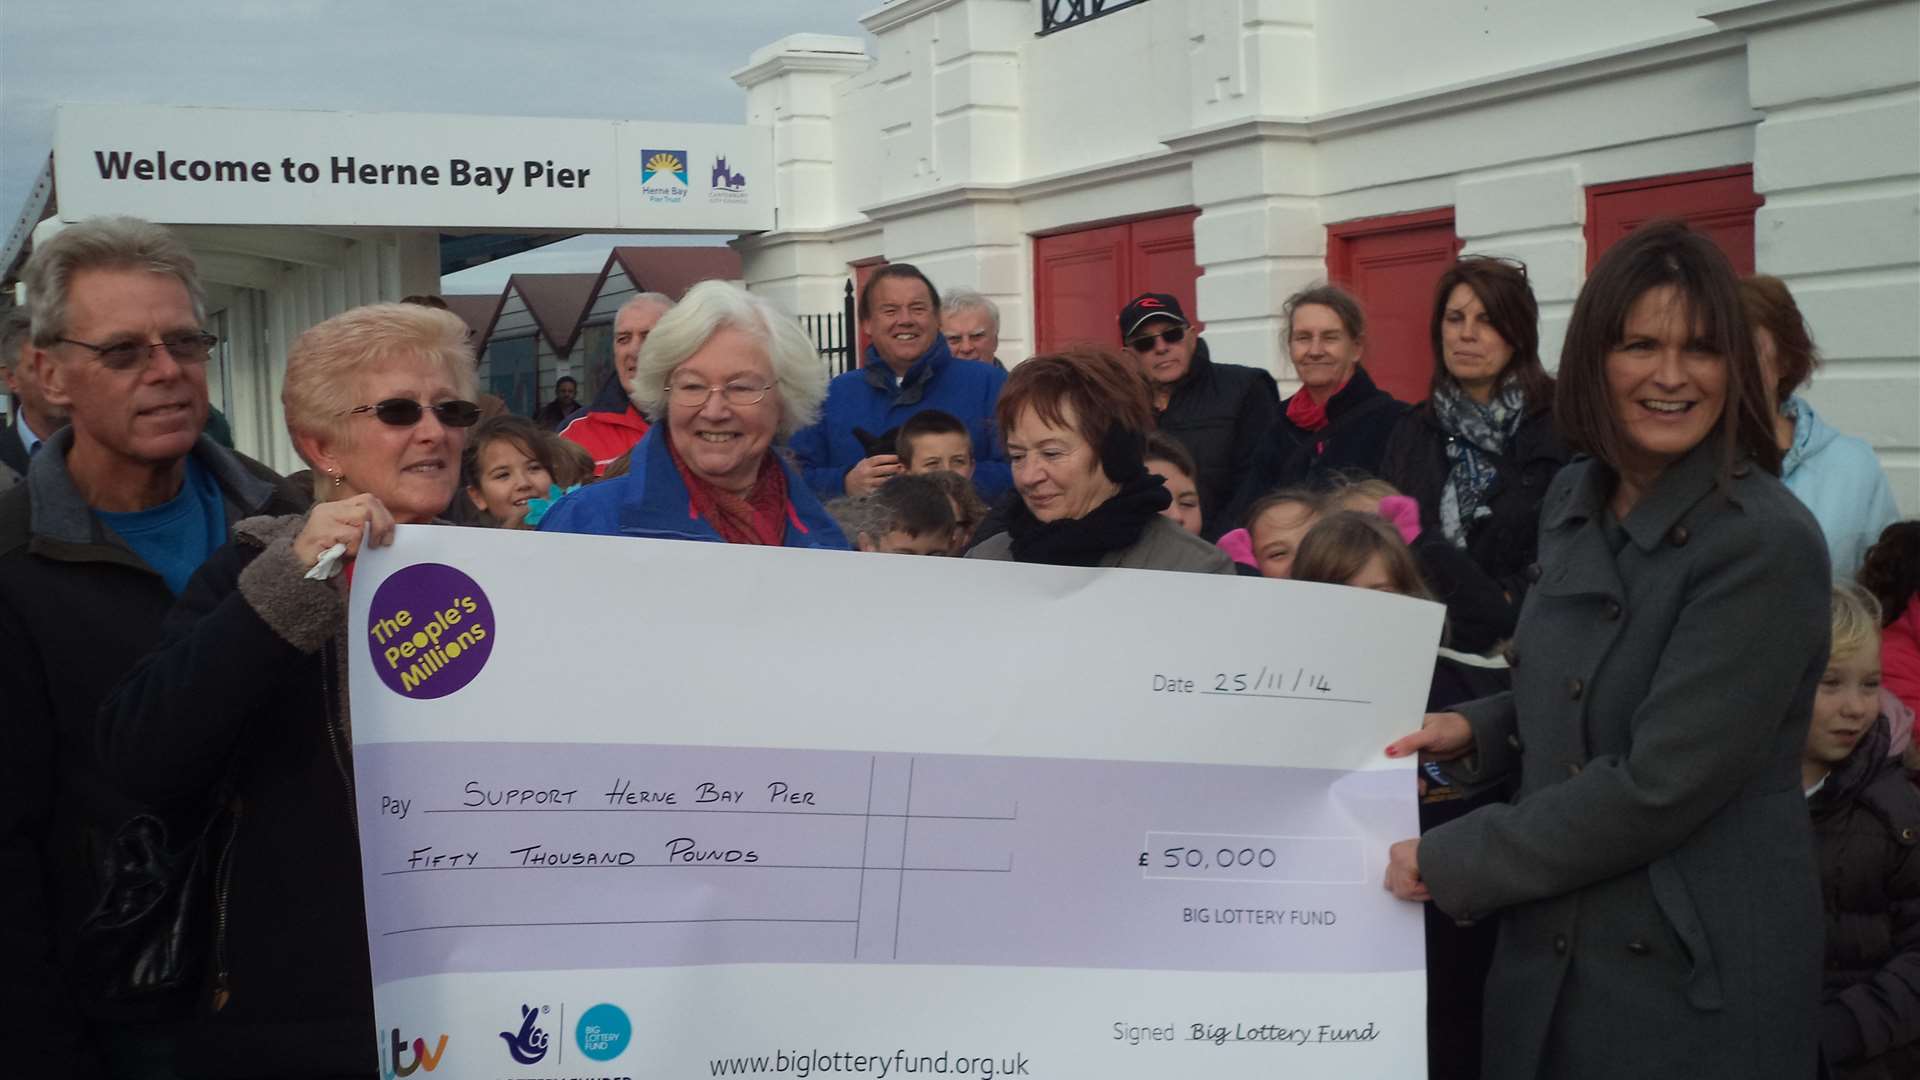 ITV Meridian presenter Sarah Saunders handed over the cheque for £50,000